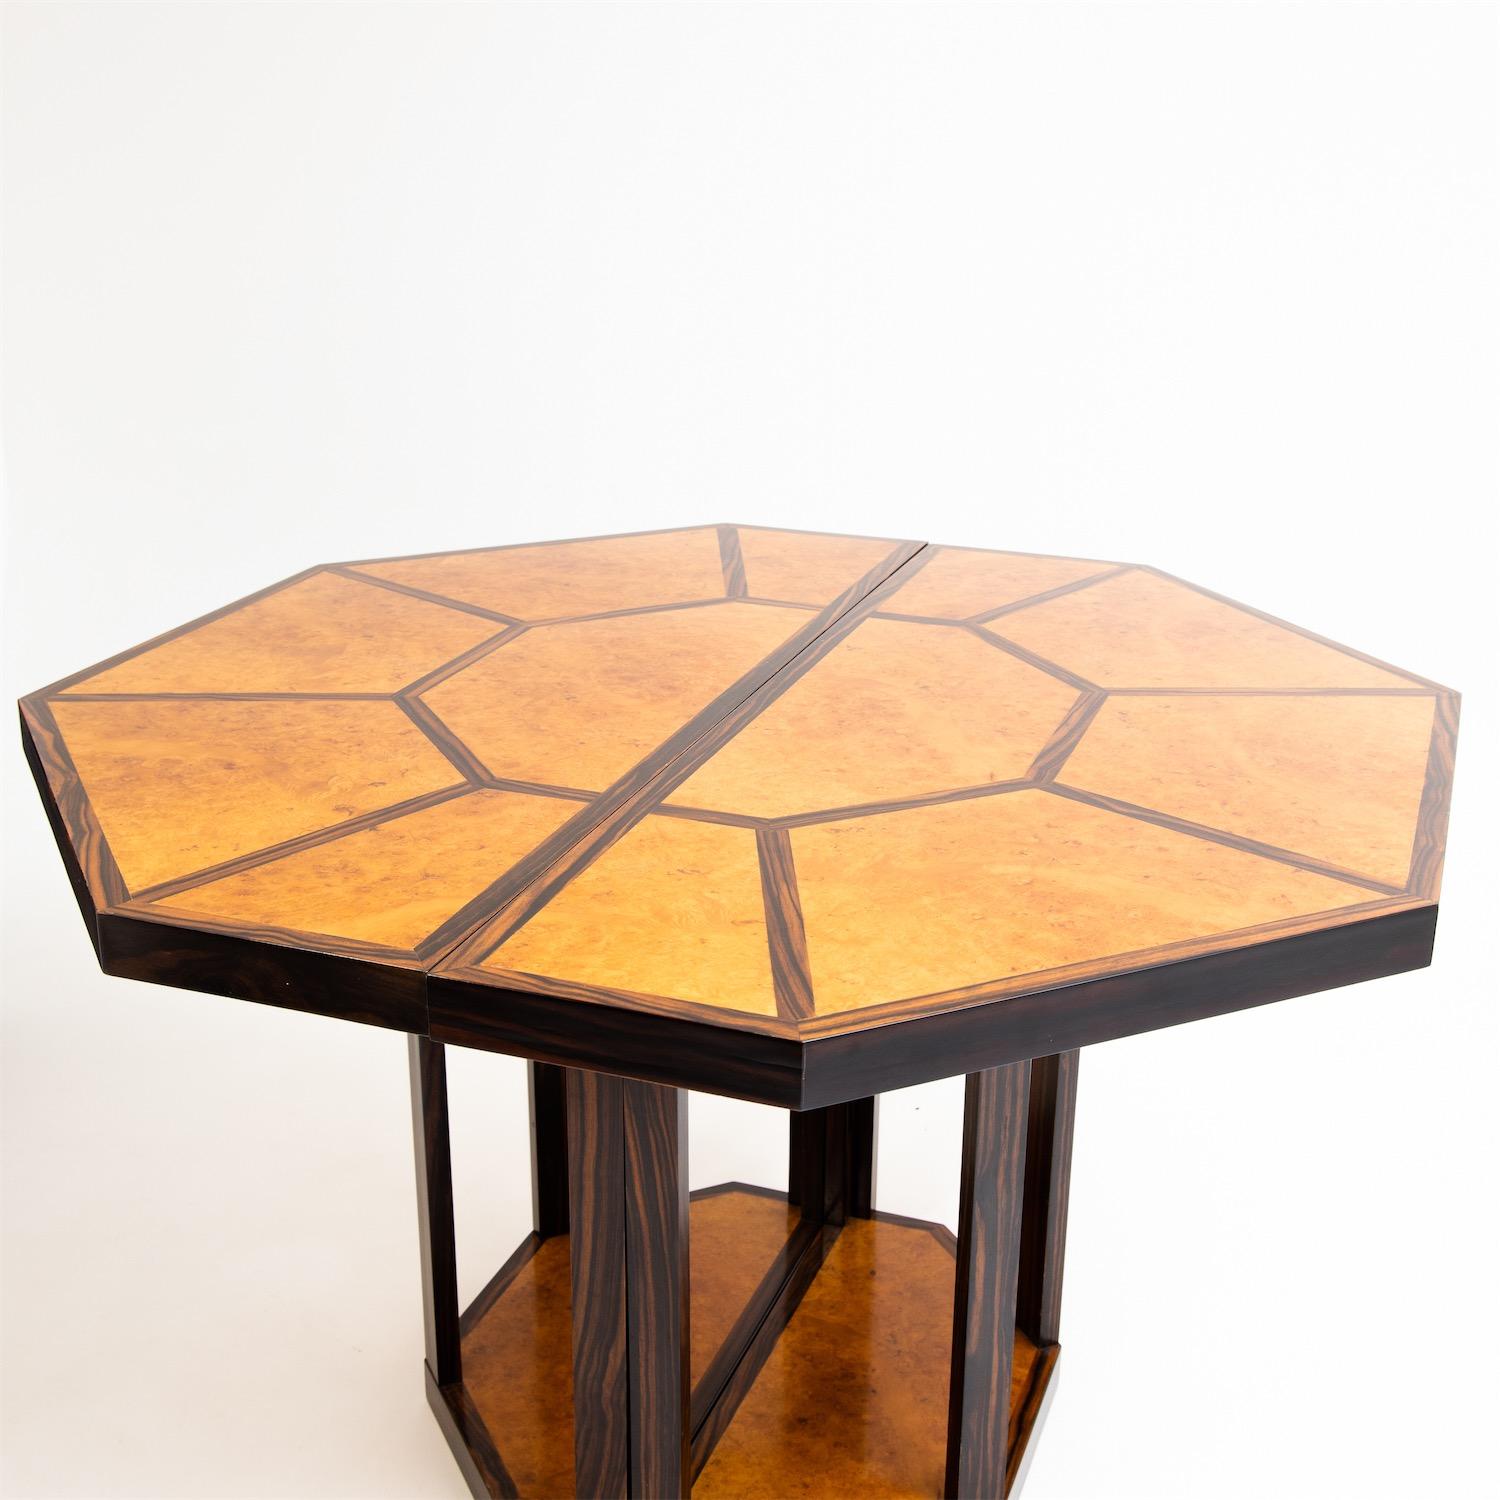 Multifunctional 'Puzzle' table by Gabriella Crespi (1922-2017) in octagonal shape on a central base, veneered in Thuja wood. The maximum dimensions of the table are 168.5 x 119 cm. If you remove the central piece, you get a table with 119 x 119 cm